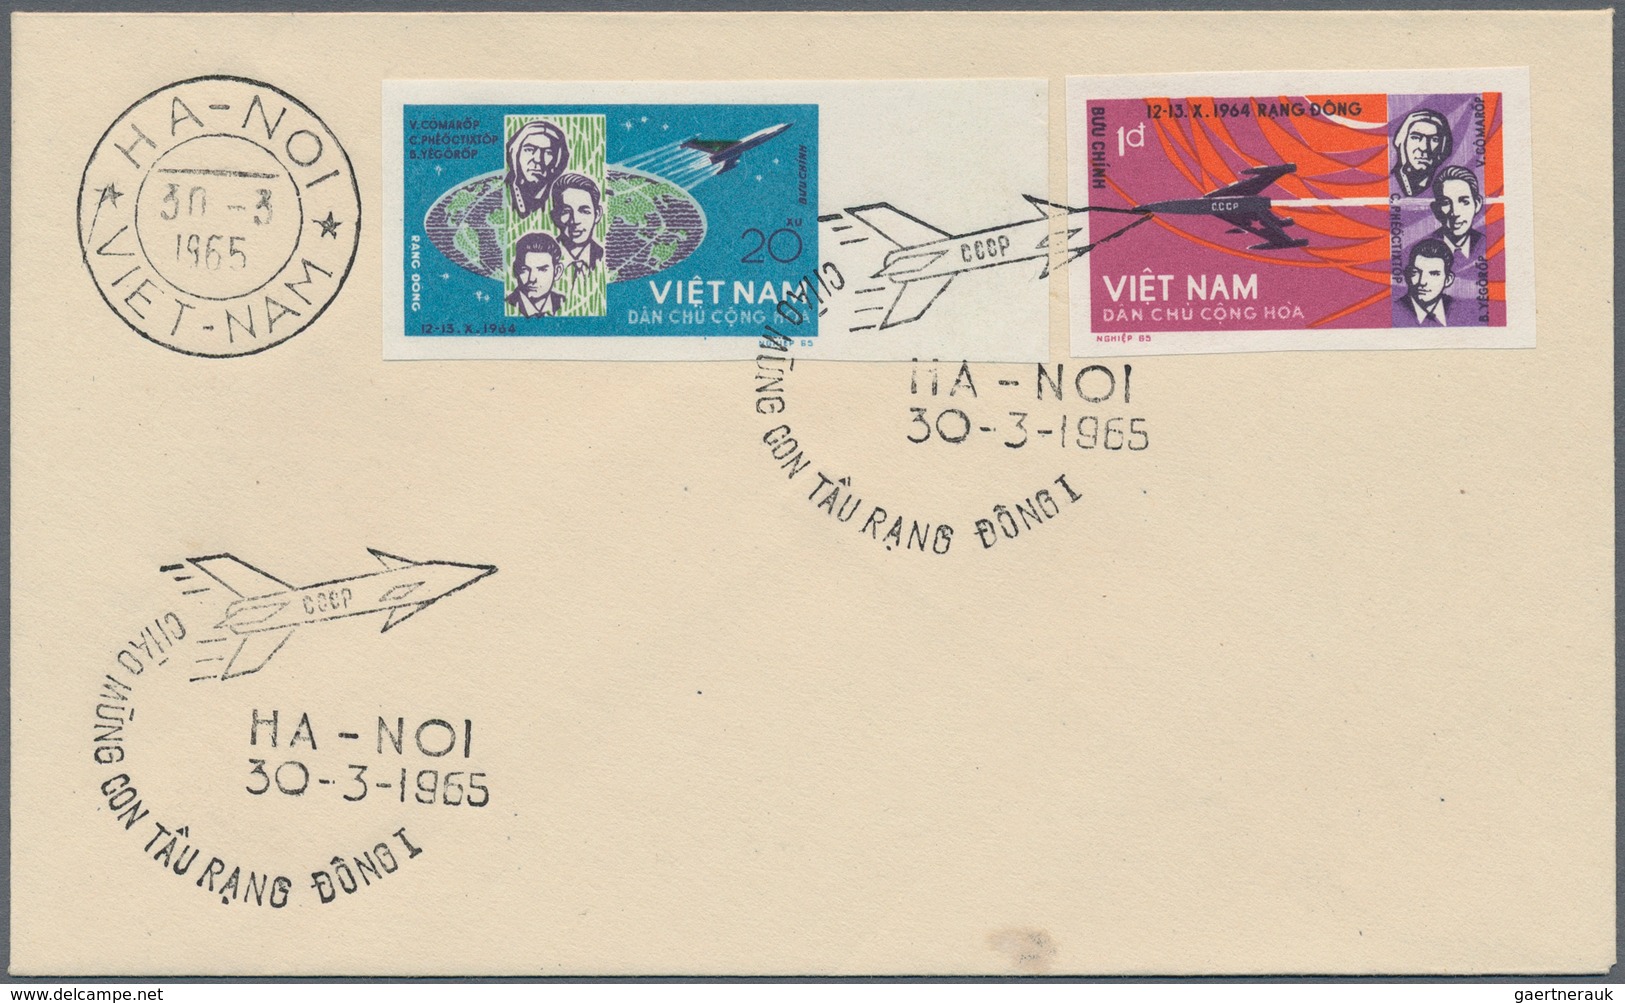 Vietnam-Süd (1951-1975): 1956/1974, accumulation of apprx. 530 commemorative covers, apparently main